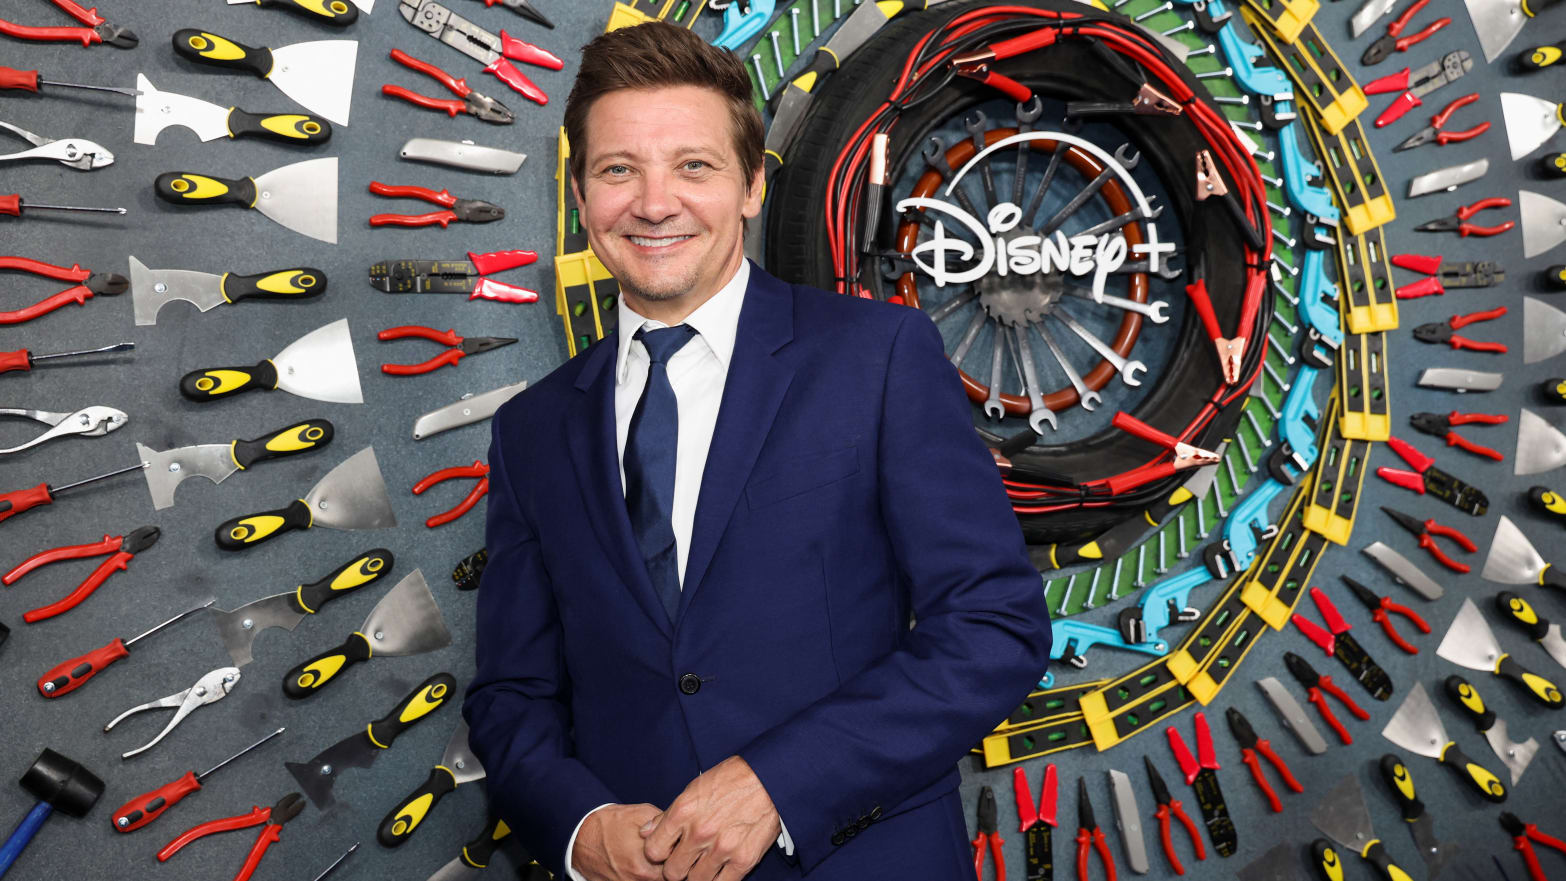 Co-host and Executive Producer Jeremy Renner attends a premiere for the television series 'Rennervations' in Los Angeles, California, U.S. April 11, 2023.